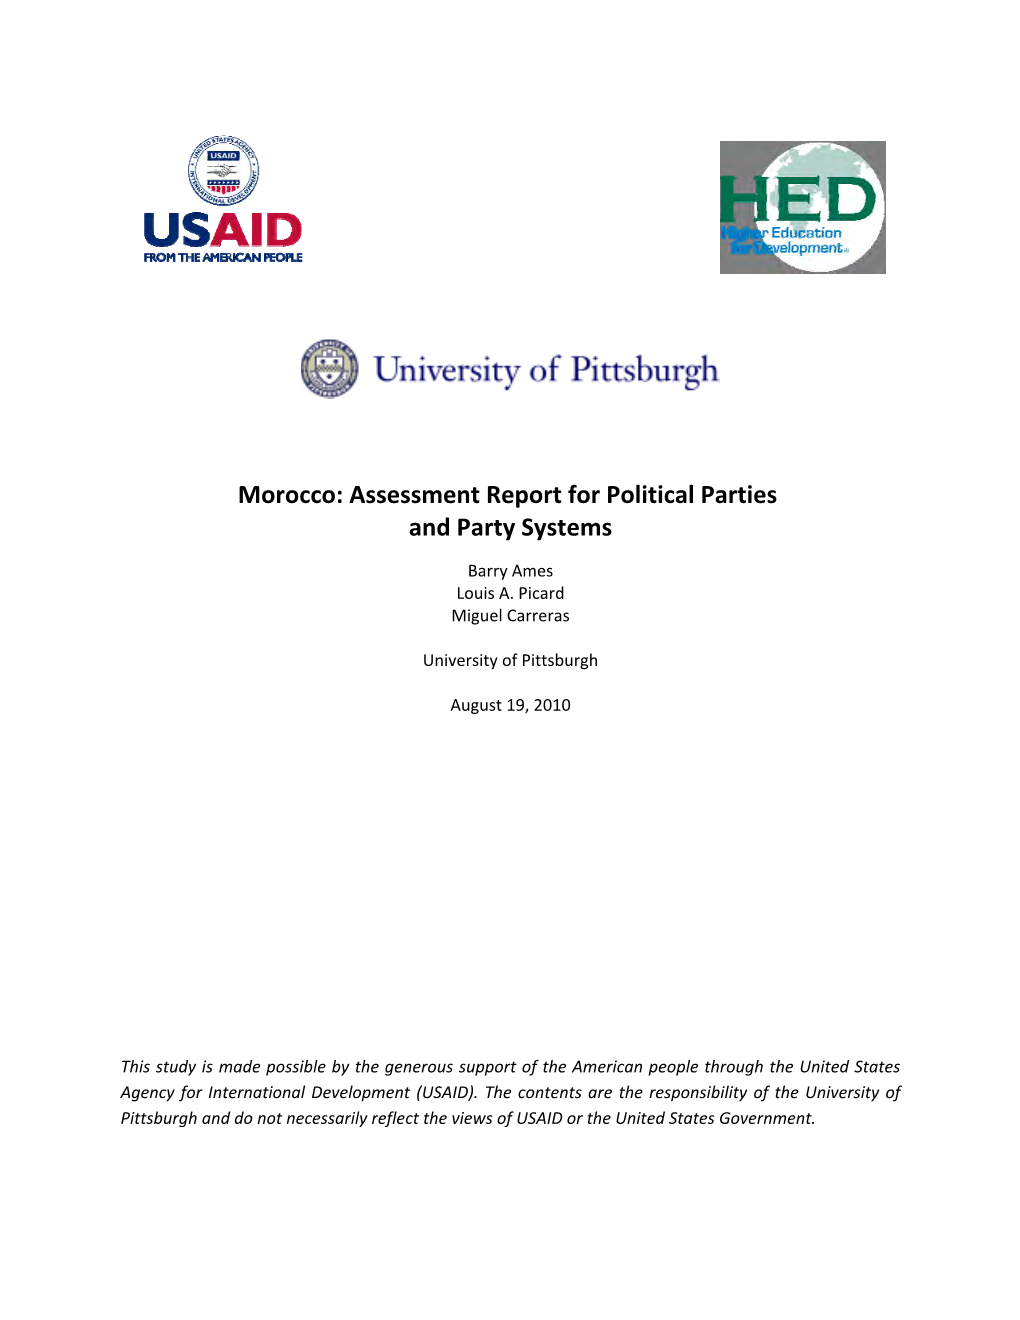 Morocco: Assessment Report for Political Parties and Party Systems